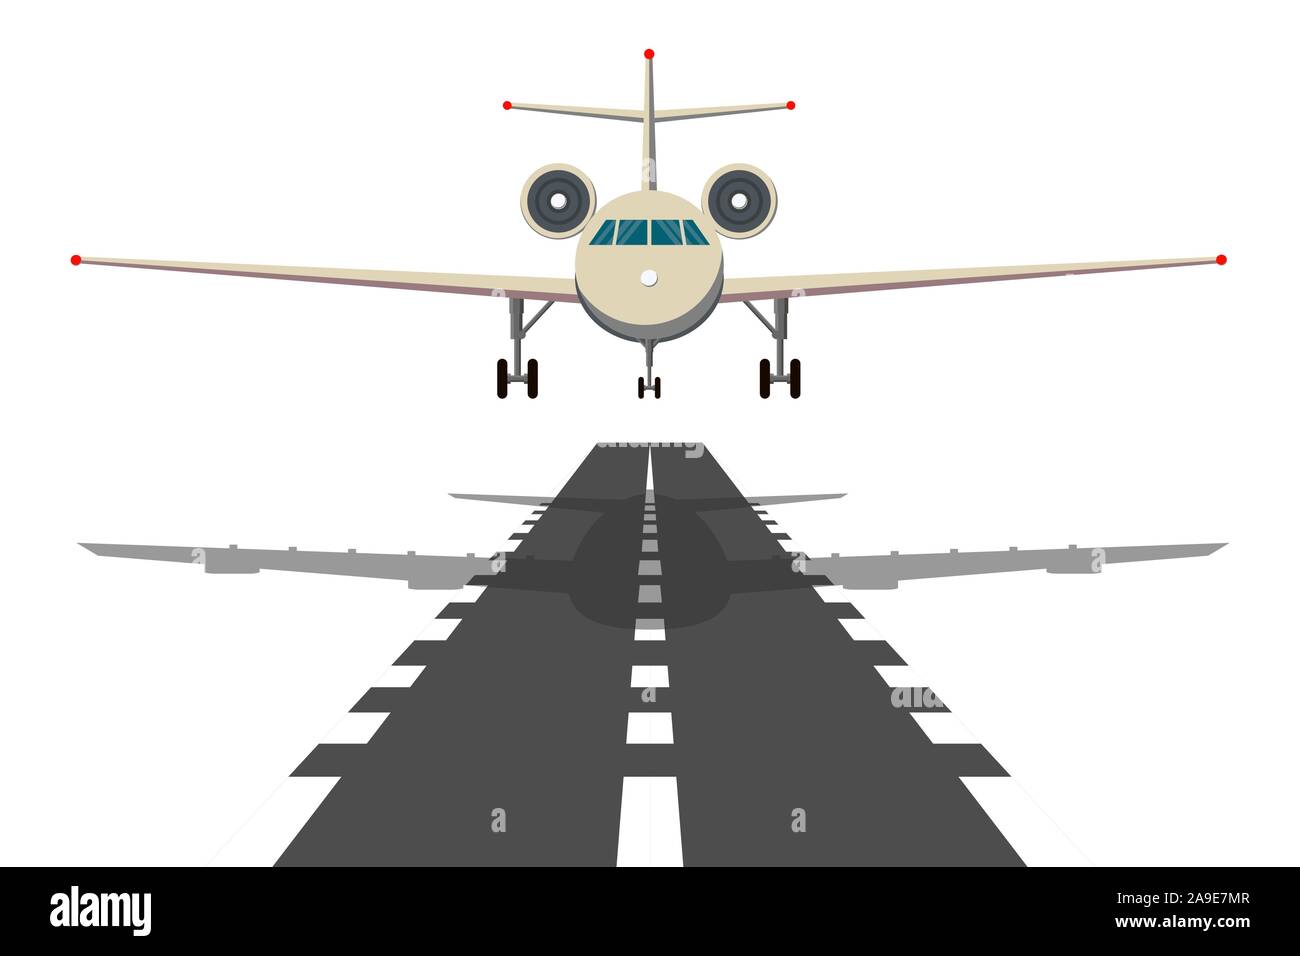 Jet aeroplane on runway. Aircraft takeoff from civil airline to blue sky realistic vector background illustrations. Stock Vector